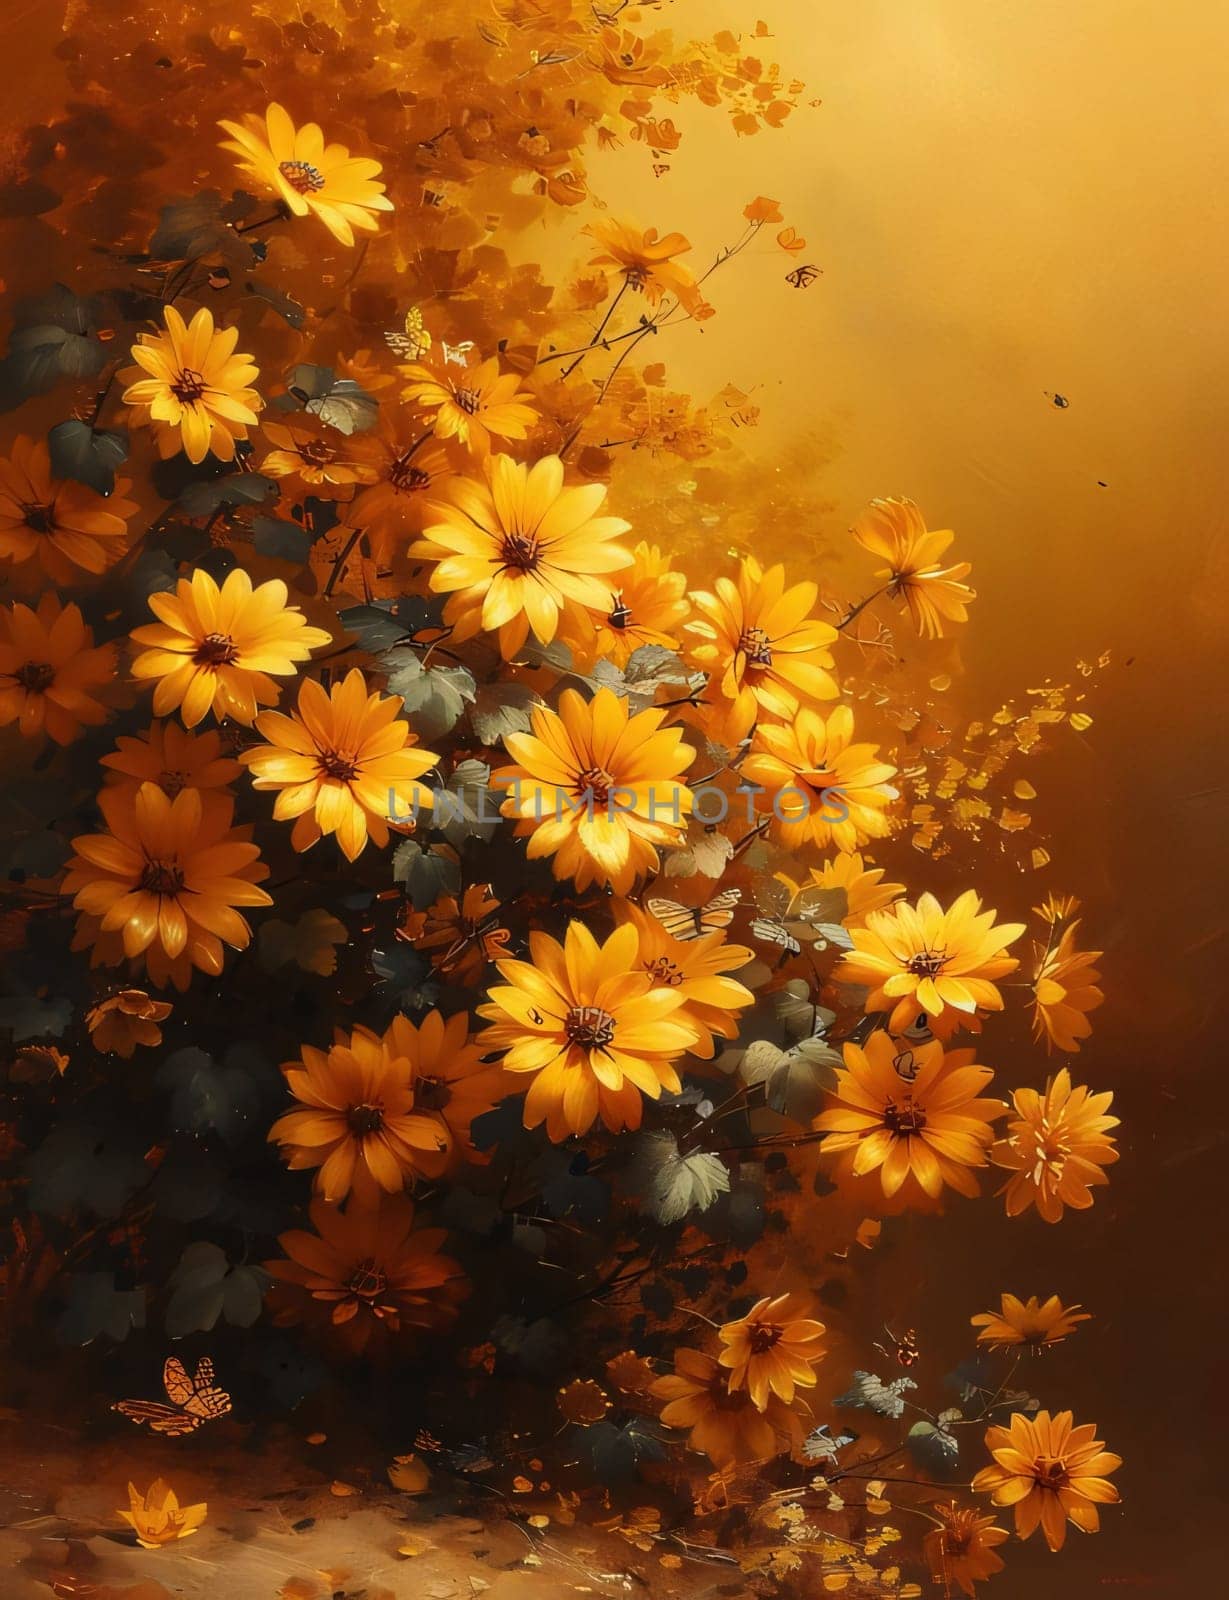 Dozens of yellow flowers on a bright orange background. Flowering flowers, a symbol of spring, new life. A joyful time of nature waking up to life.